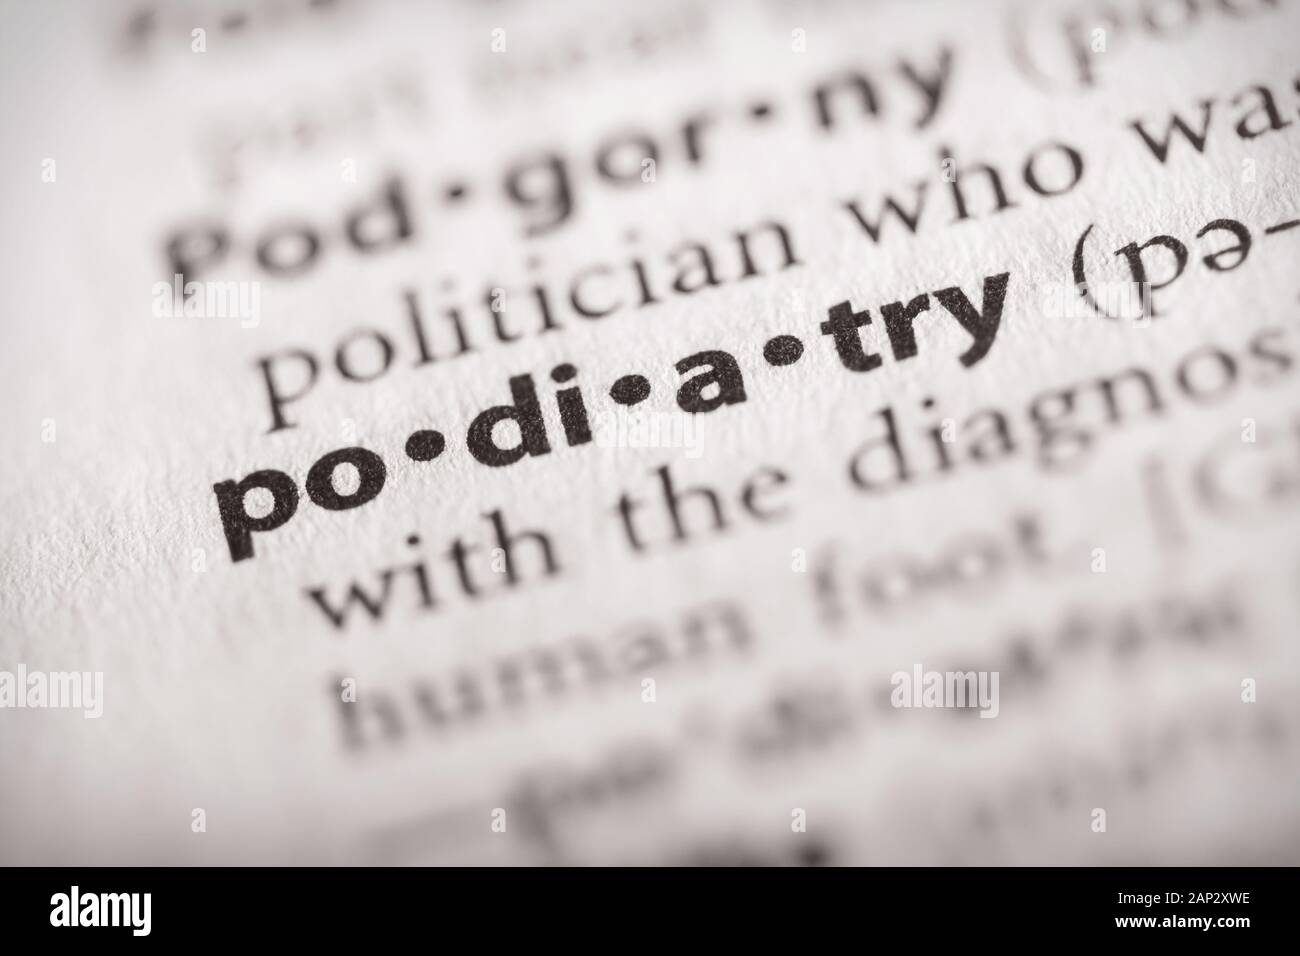 Selective focus on the word podiatry. Many more word photos in my portfolio. Stock Photo